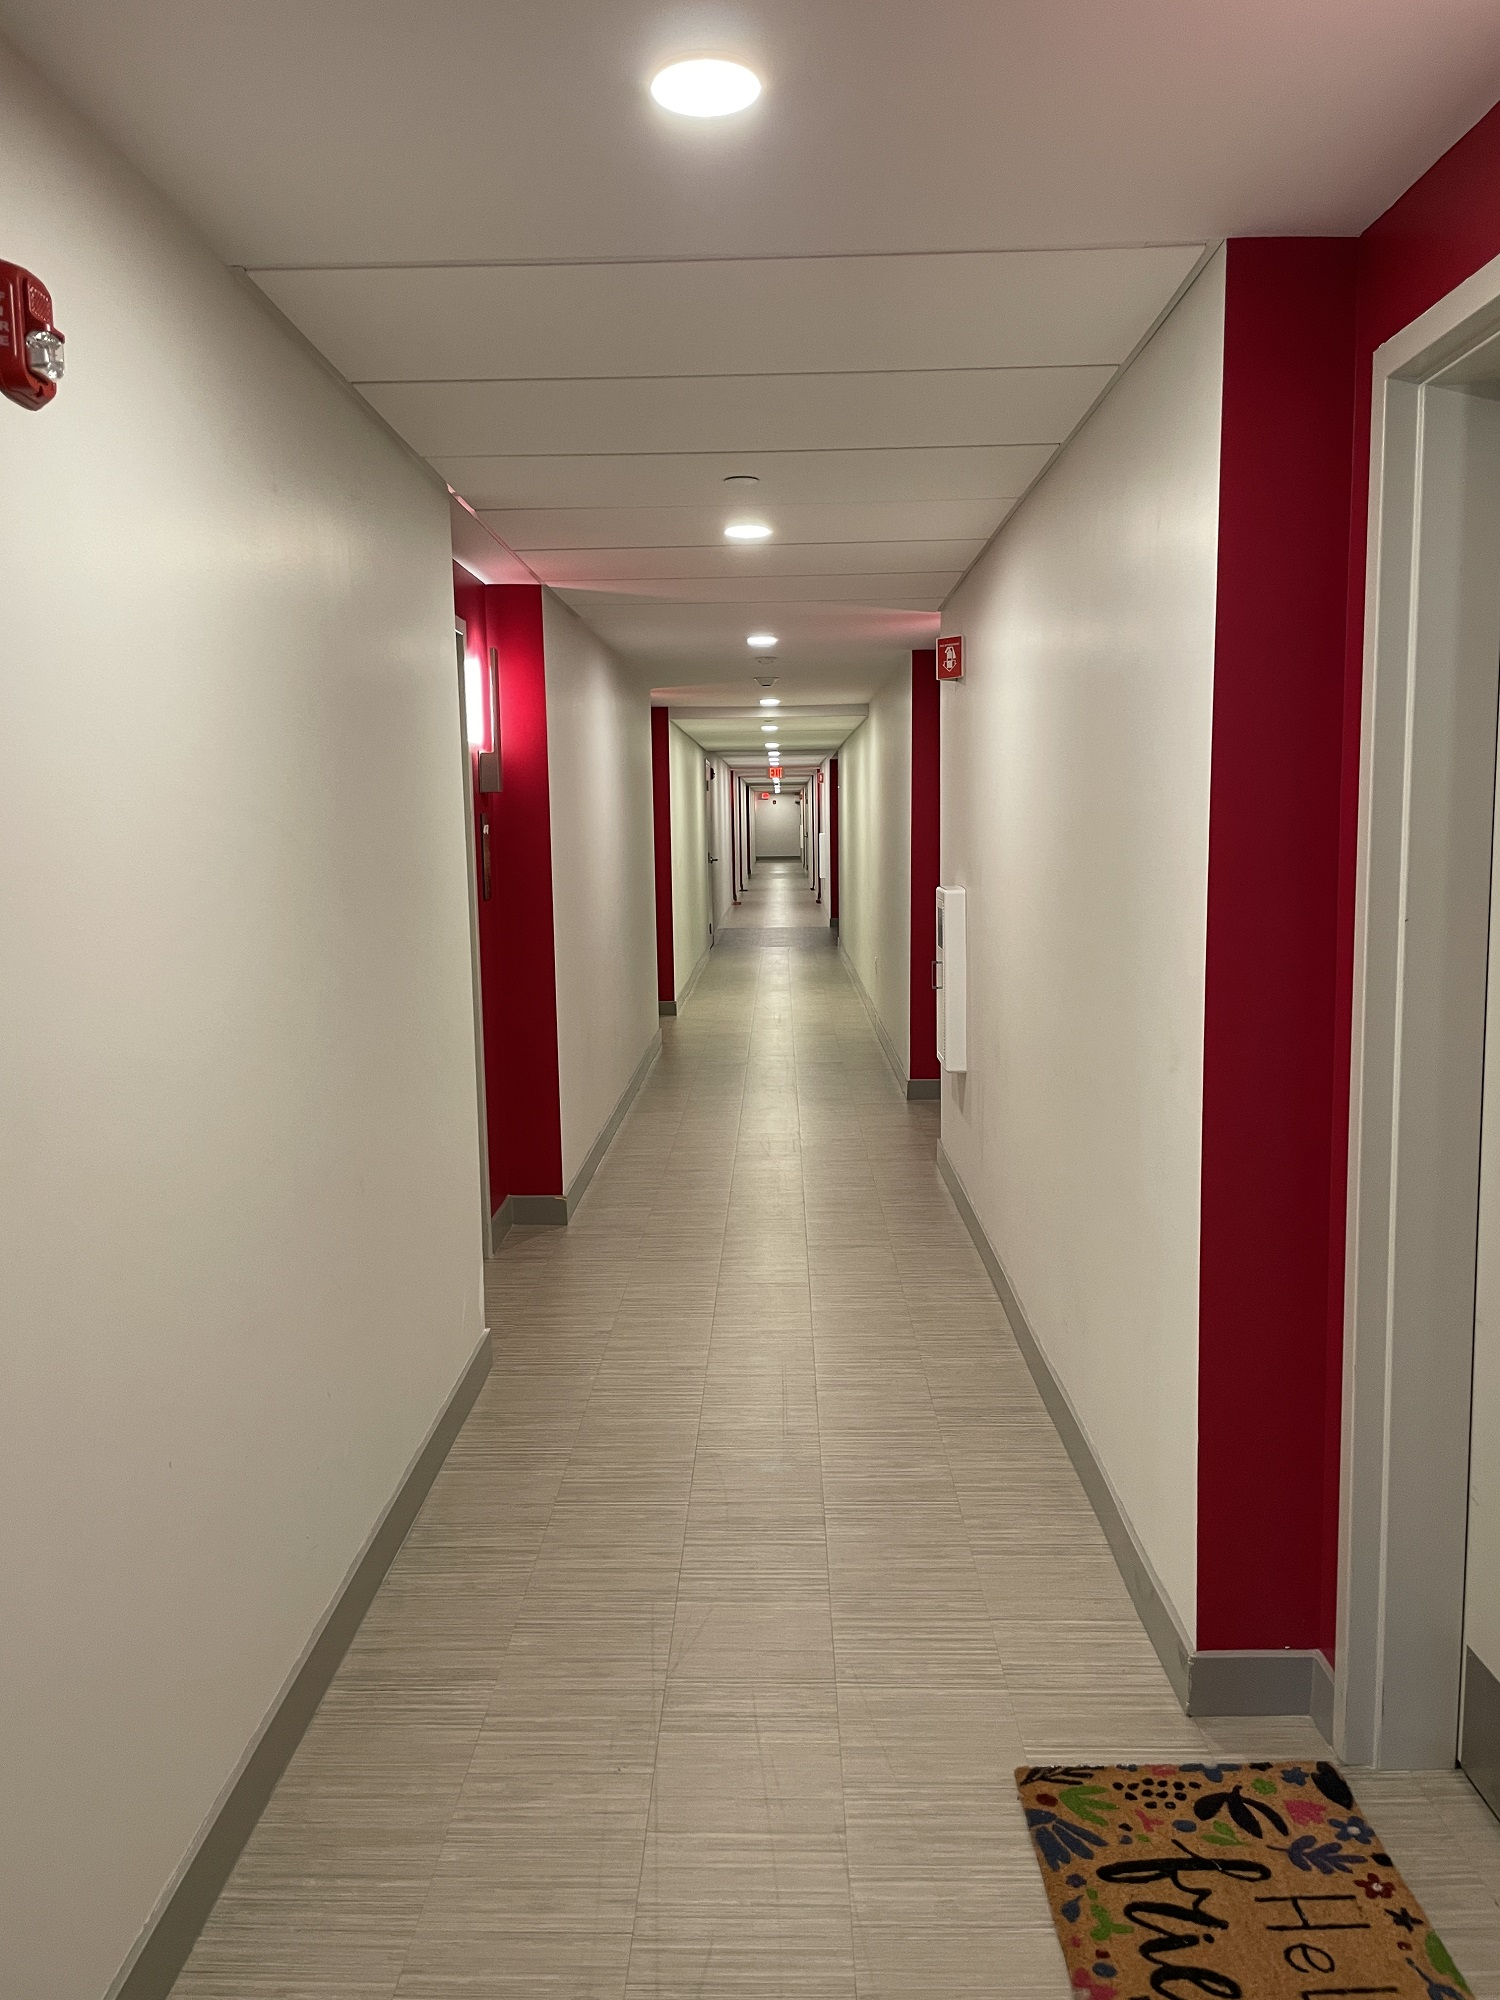 Residential hallway at Finch Cambridge